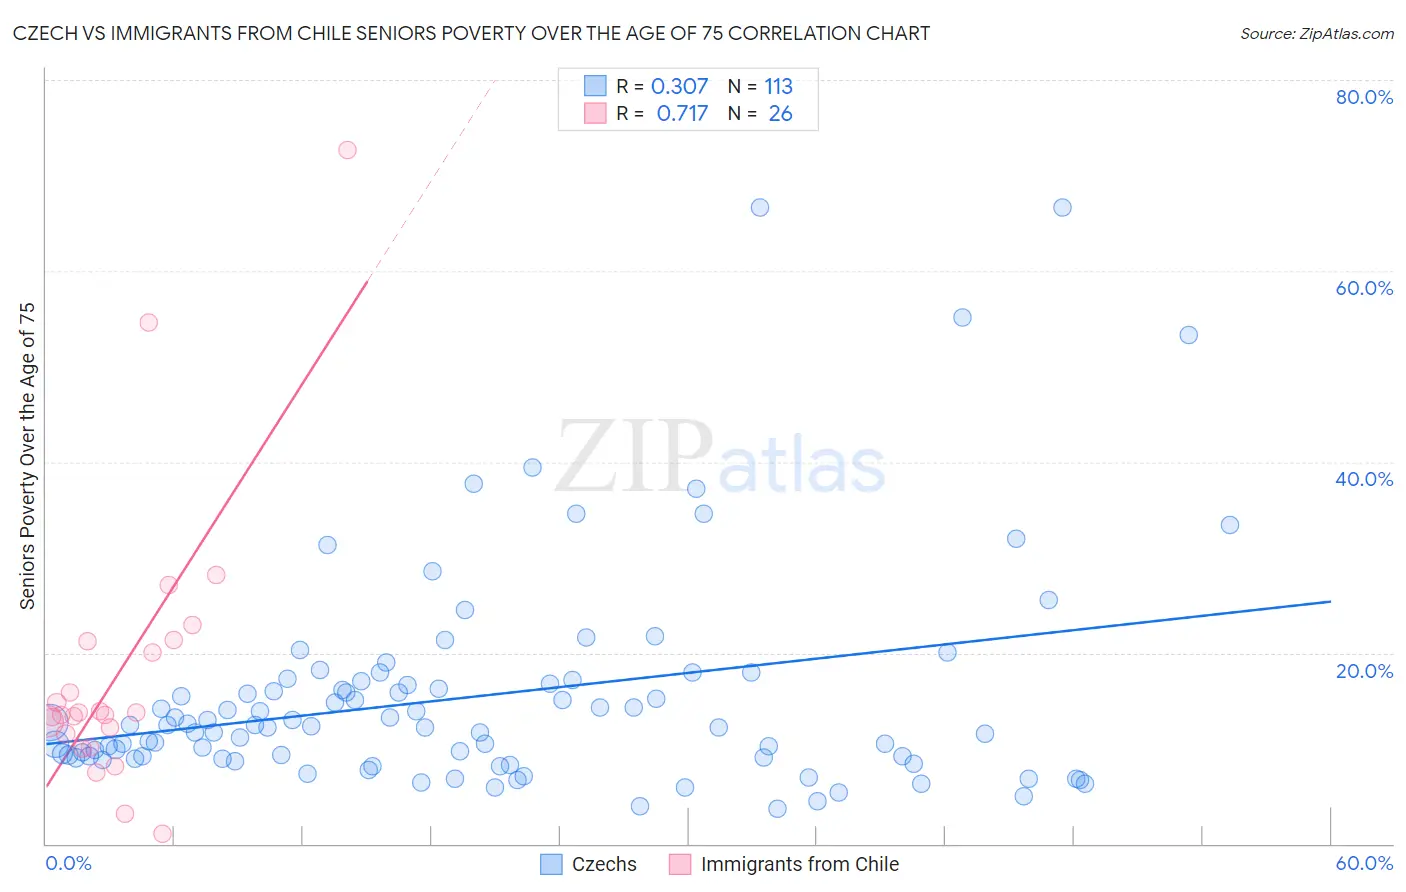 Czech vs Immigrants from Chile Seniors Poverty Over the Age of 75